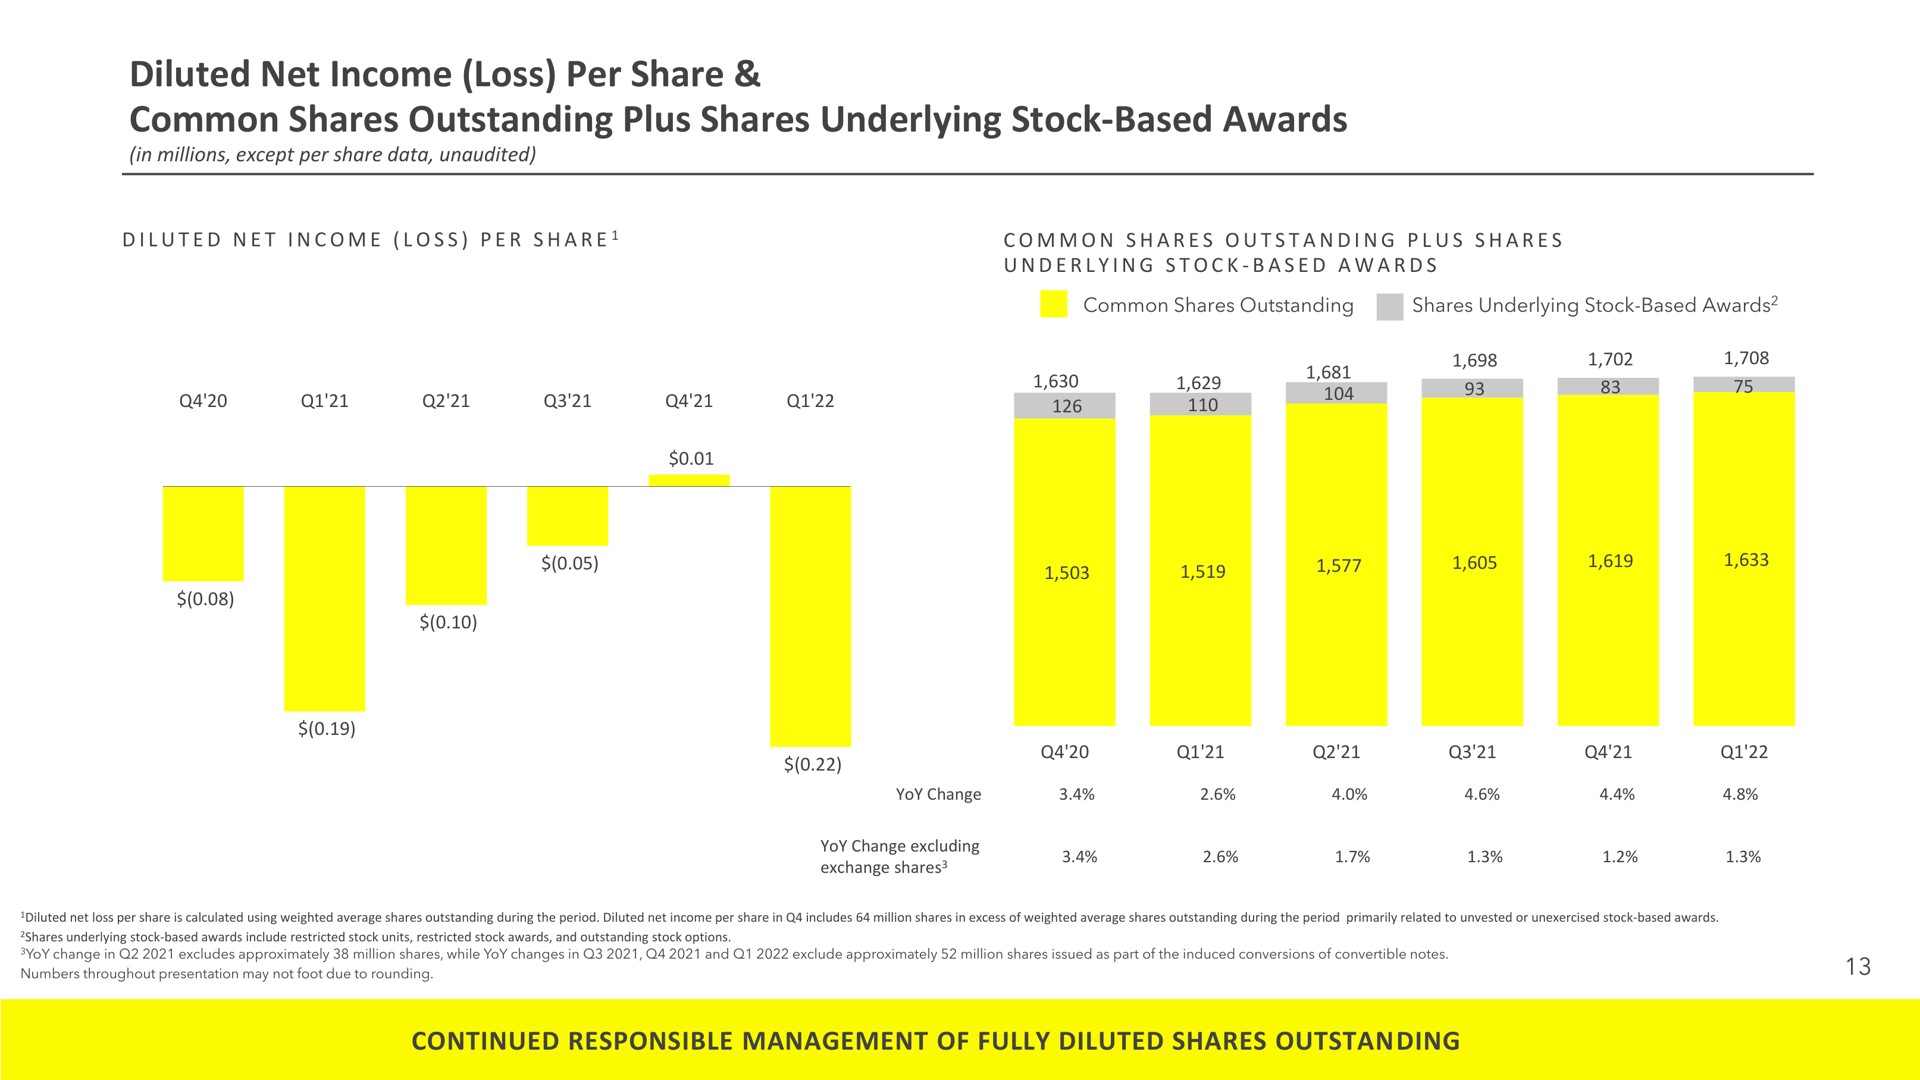 diluted net income loss per share common shares outstanding plus shares underlying stock based awards continued responsible management of fully diluted shares outstanding | Snap Inc